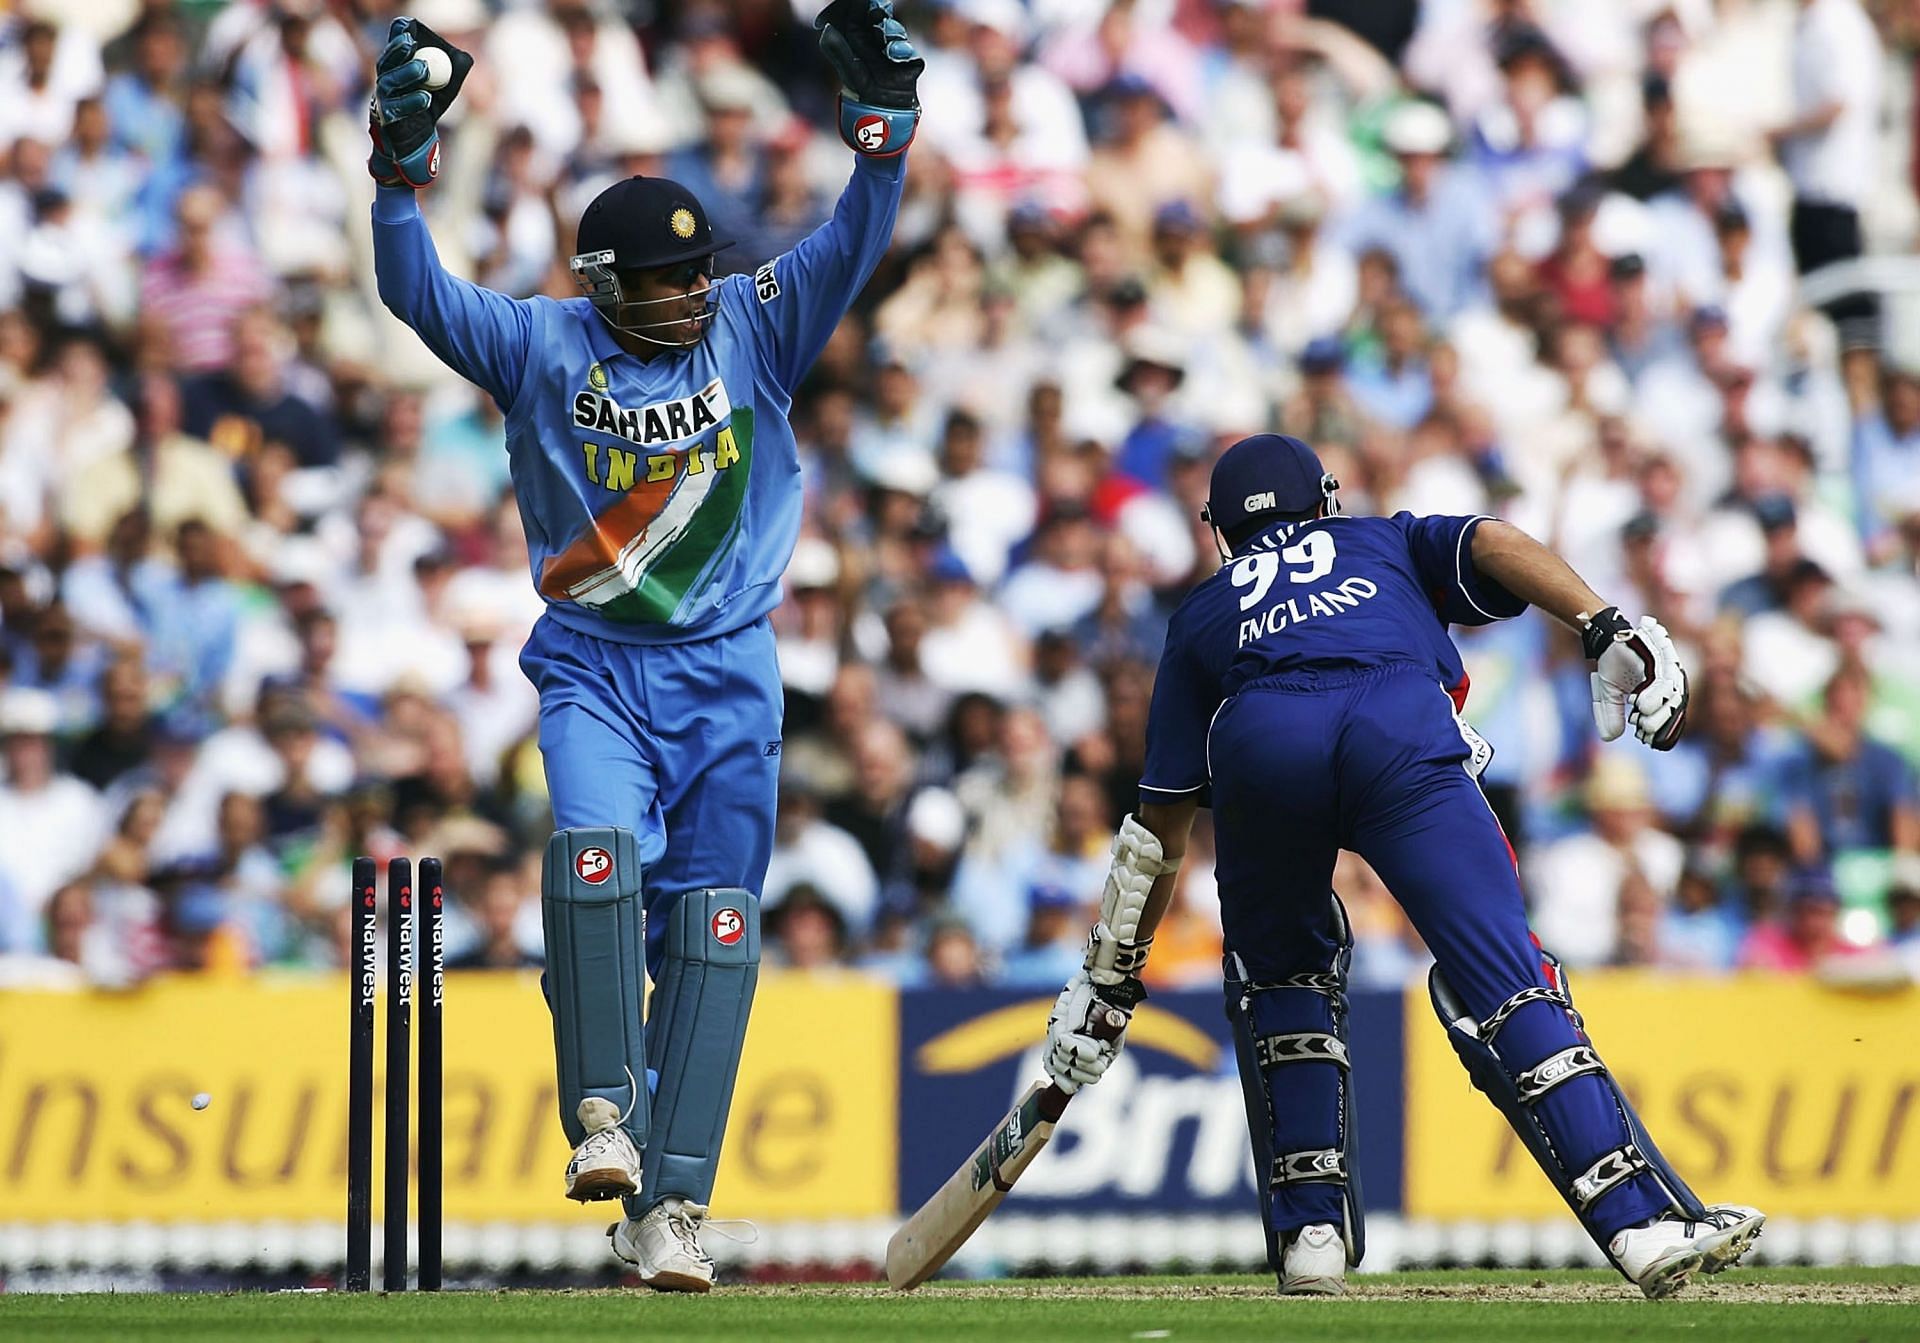 Rahul Dravid also kept wickets for India in white-ball cricket [Pic Credit: Getty Images]